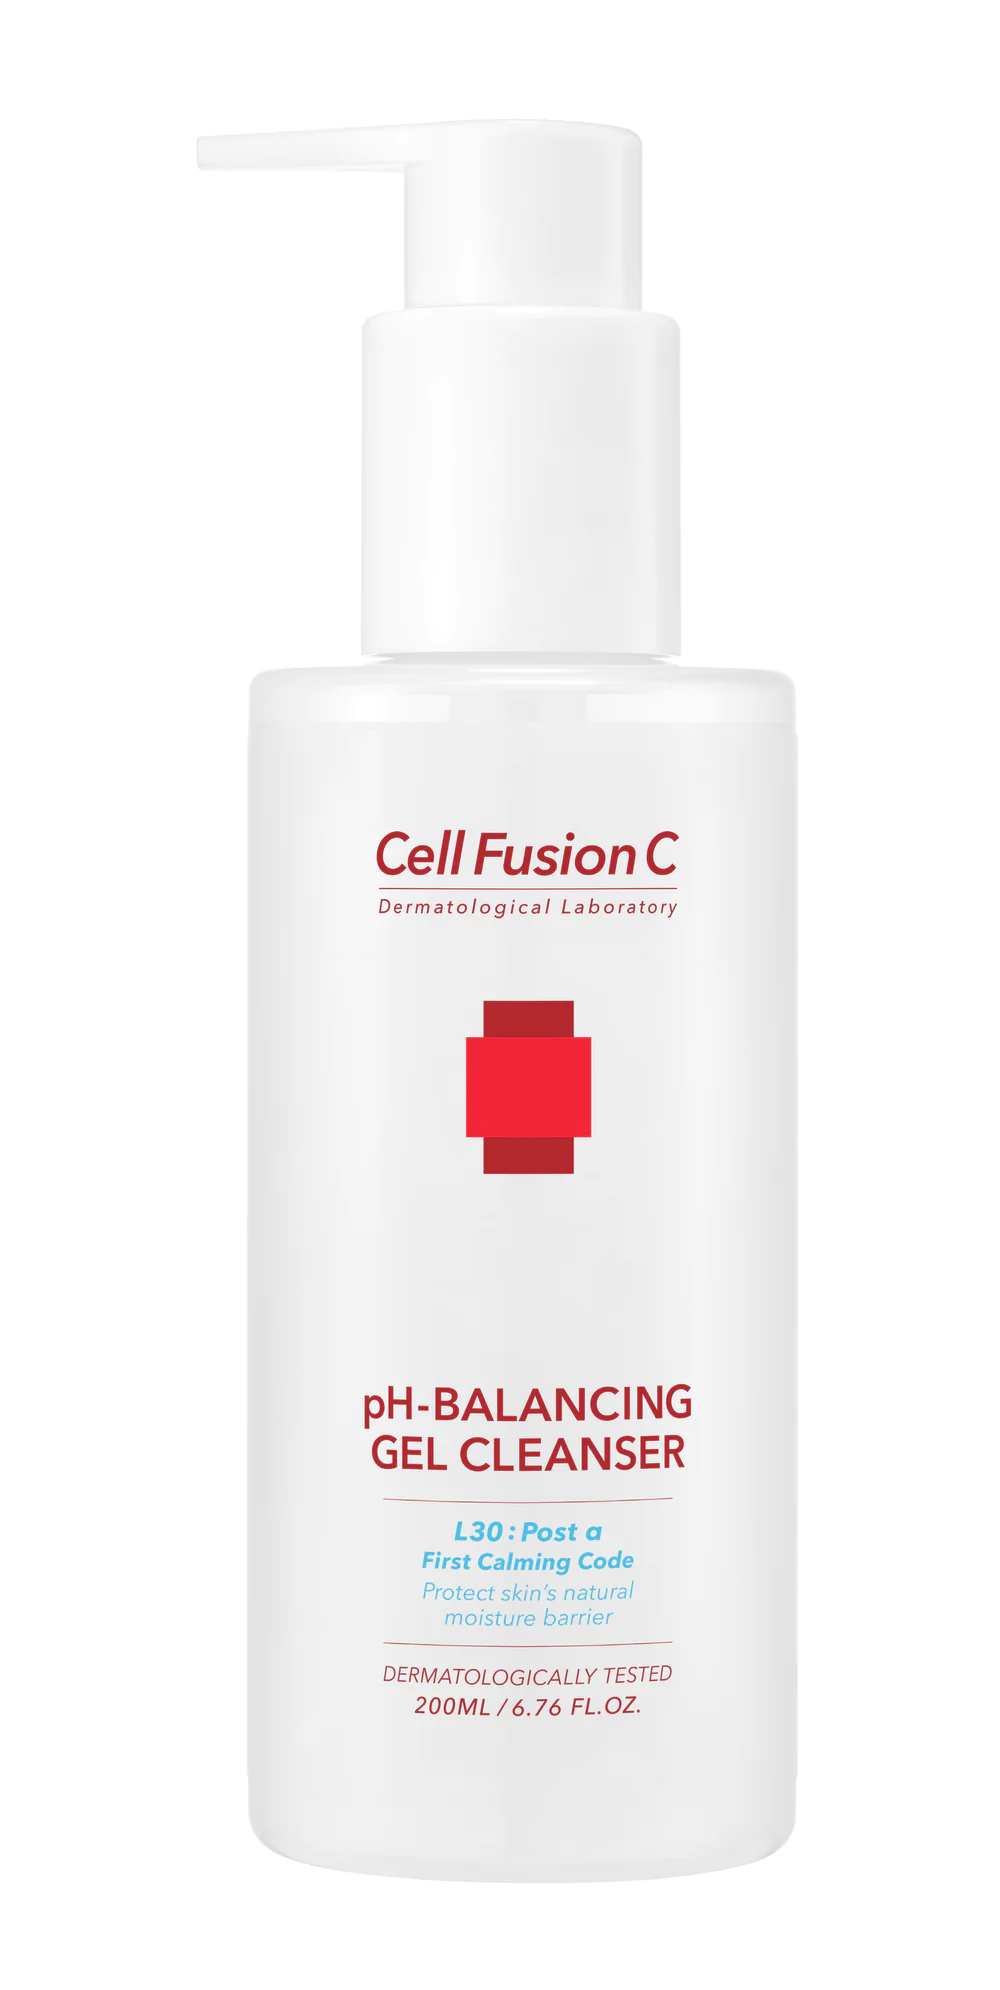 [Cell Fusion C] Post Alpha pH-Balancing Gel Cleanser